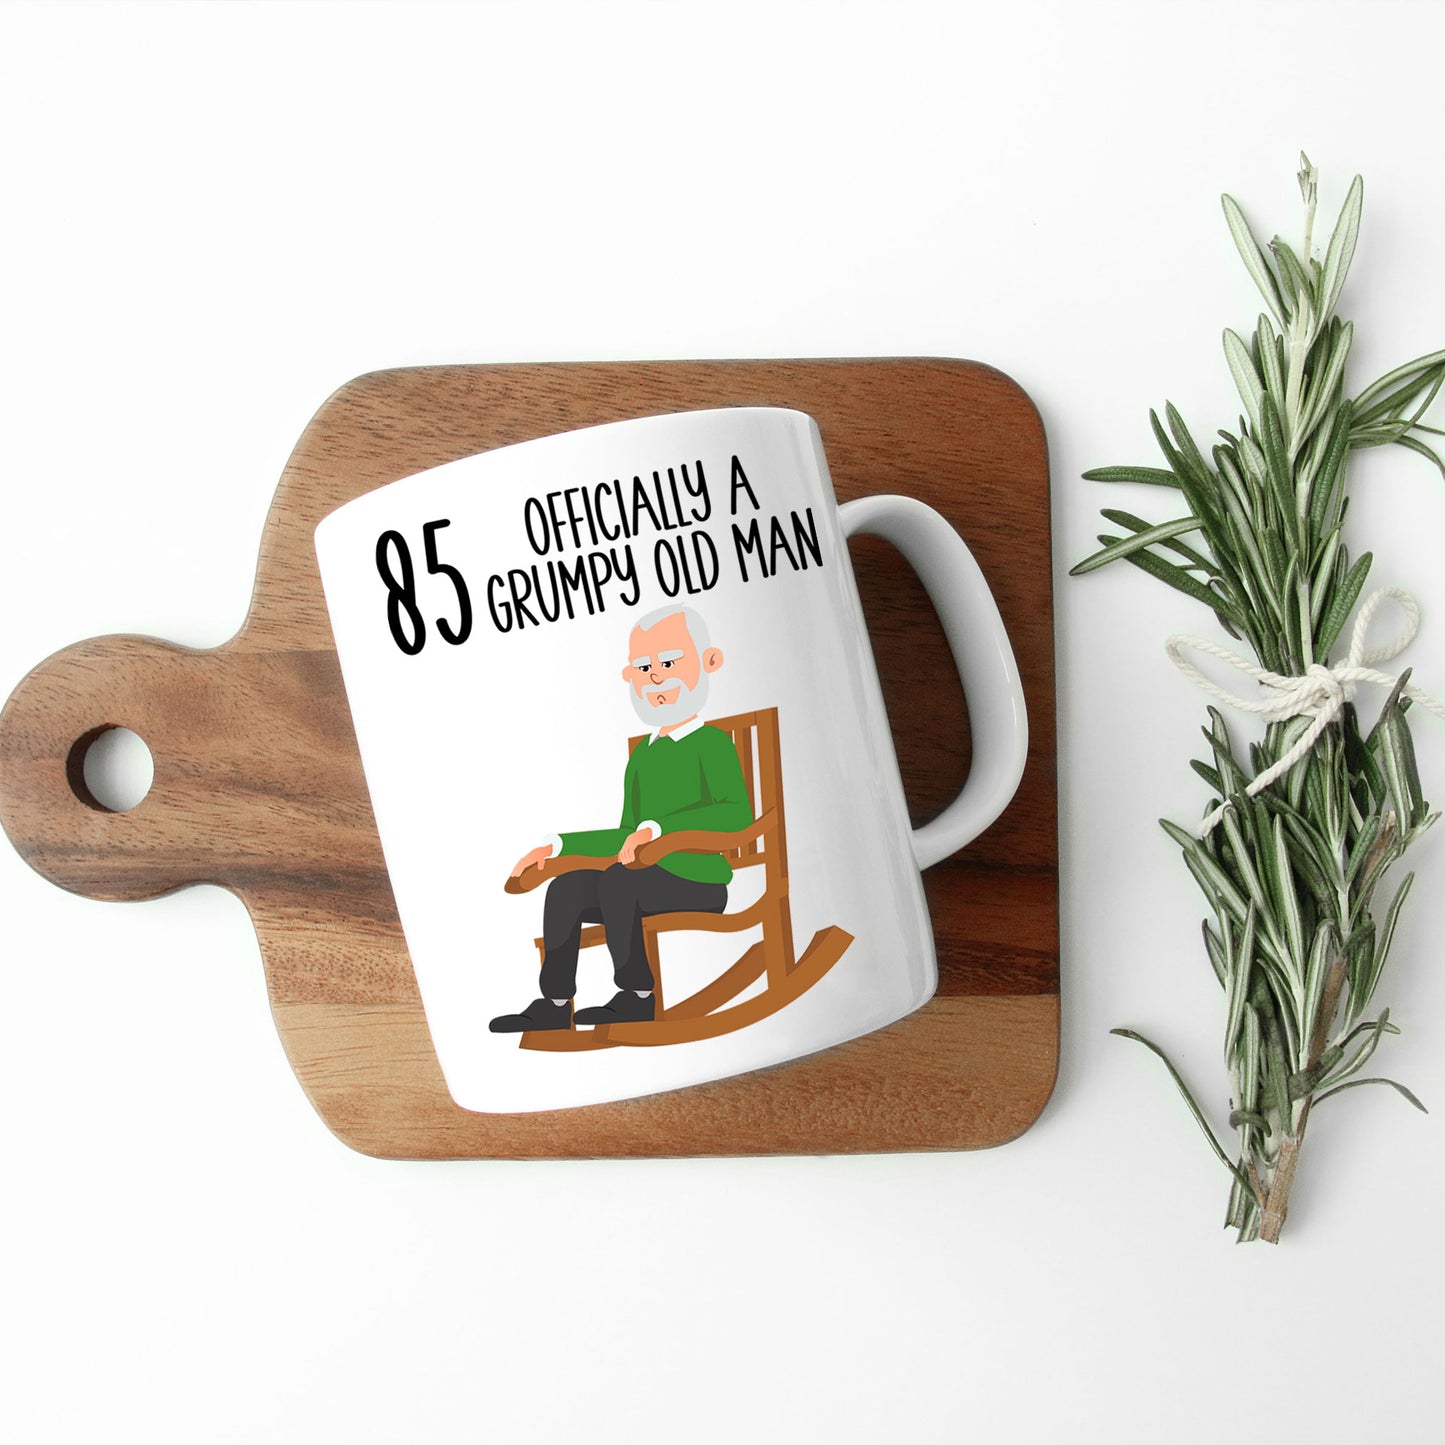 85 Officially A Grumpy Old Man Mug and/or Coaster Gift  - Always Looking Good -   